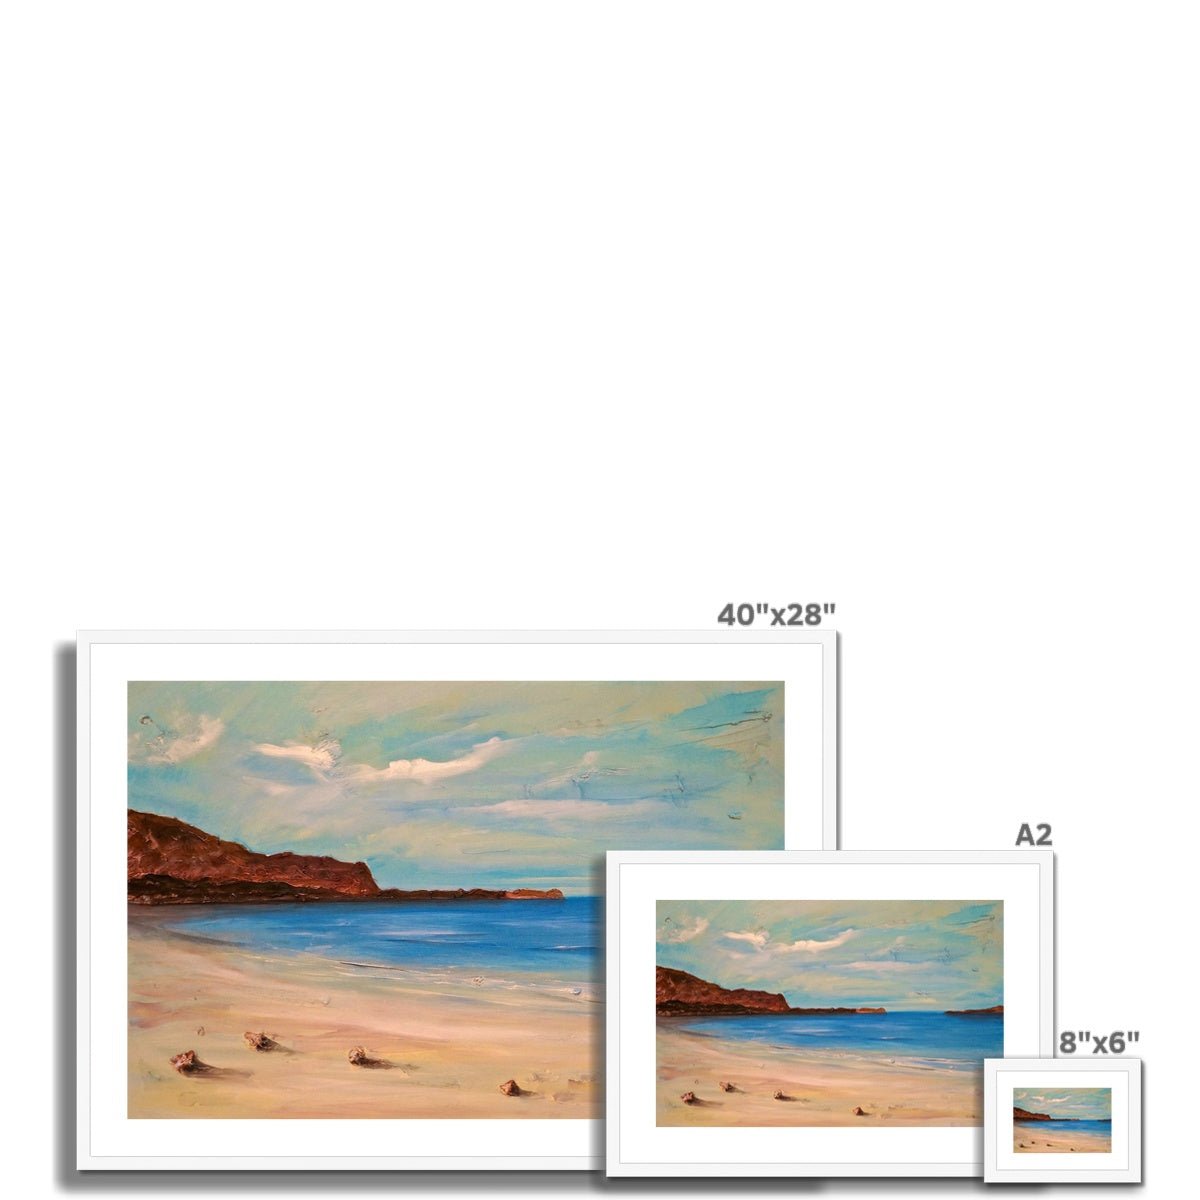 Bosta Beach Lewis Painting | Framed & Mounted Prints From Scotland-Framed & Mounted Prints-Hebridean Islands Art Gallery-Paintings, Prints, Homeware, Art Gifts From Scotland By Scottish Artist Kevin Hunter